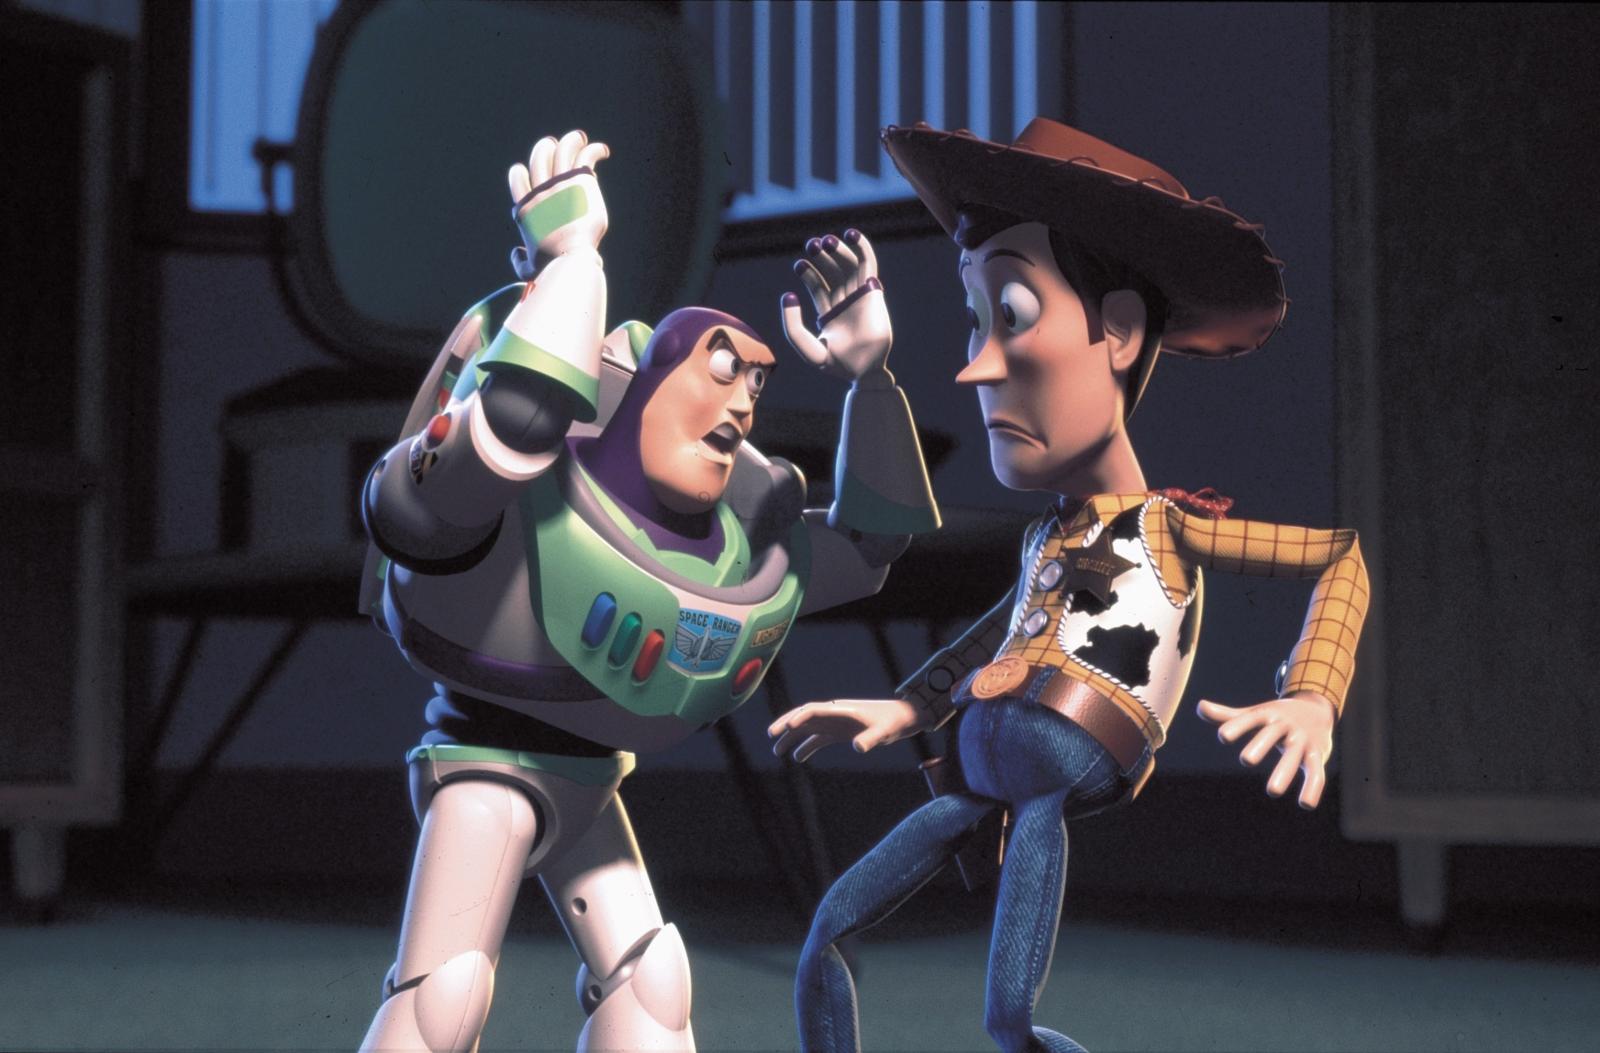 'Lightyear' Star Chris Evans Hints at Another 'Toy Story' Character Getting a Spin-Off - image 1